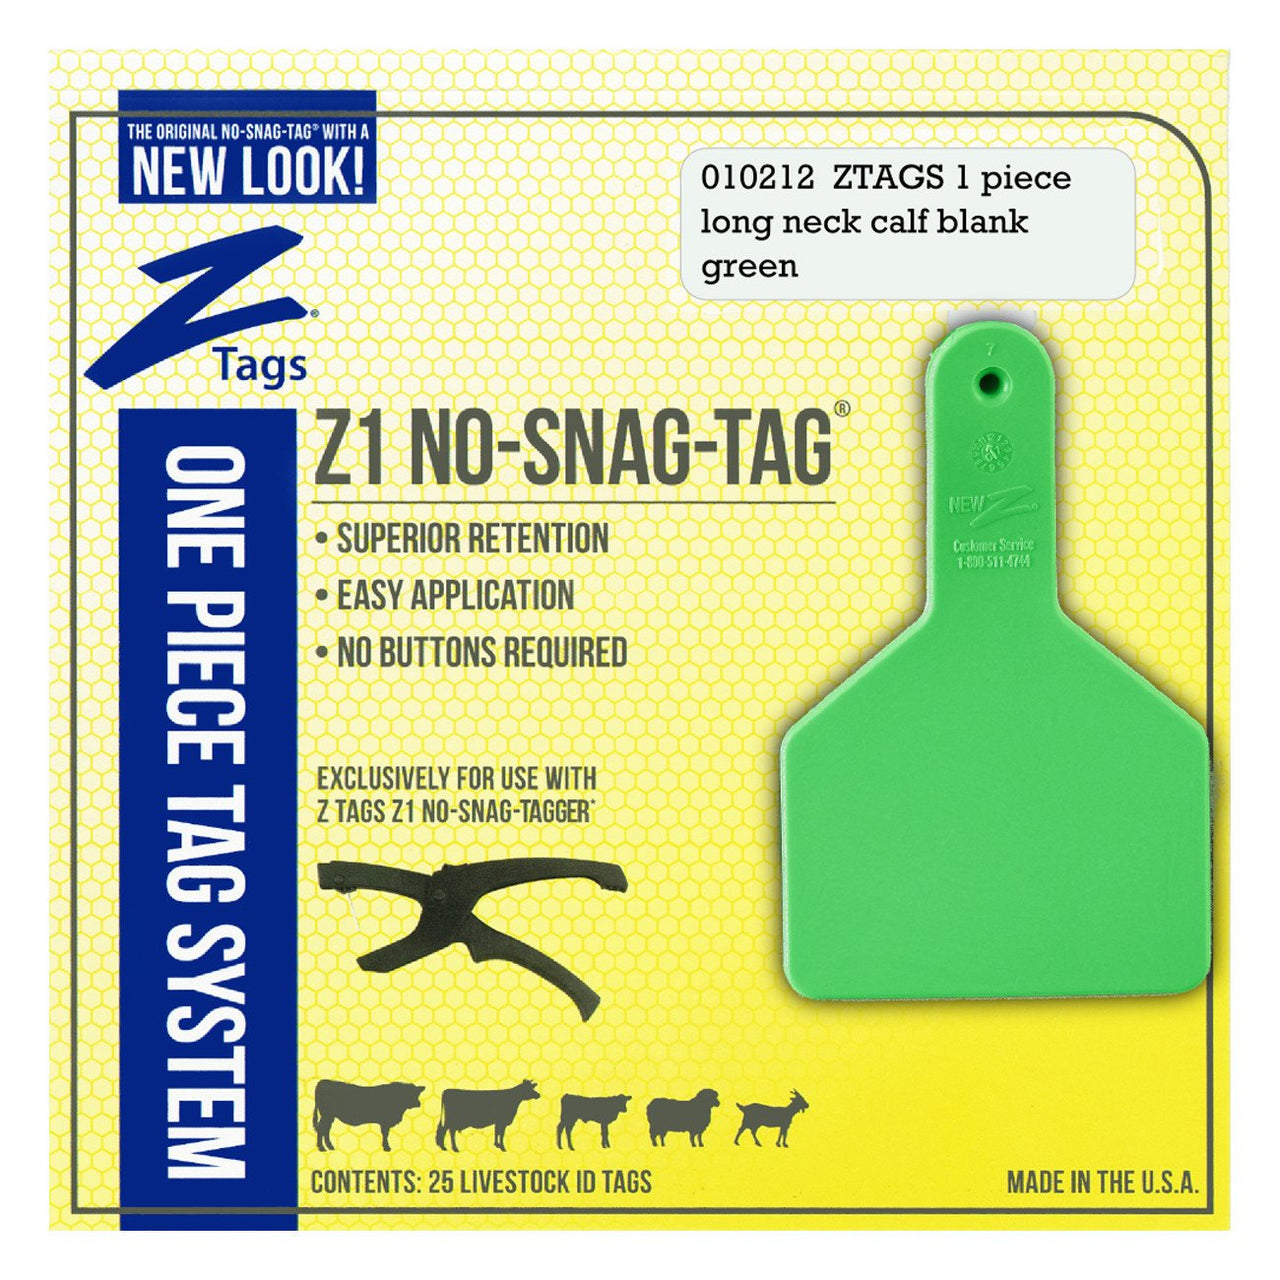 Z Tags 1 Piece Long Neck Calf Blank (Green) 25 Pack - 1 Piece Long Neck Calf Blank Tag Z Tags - Canada